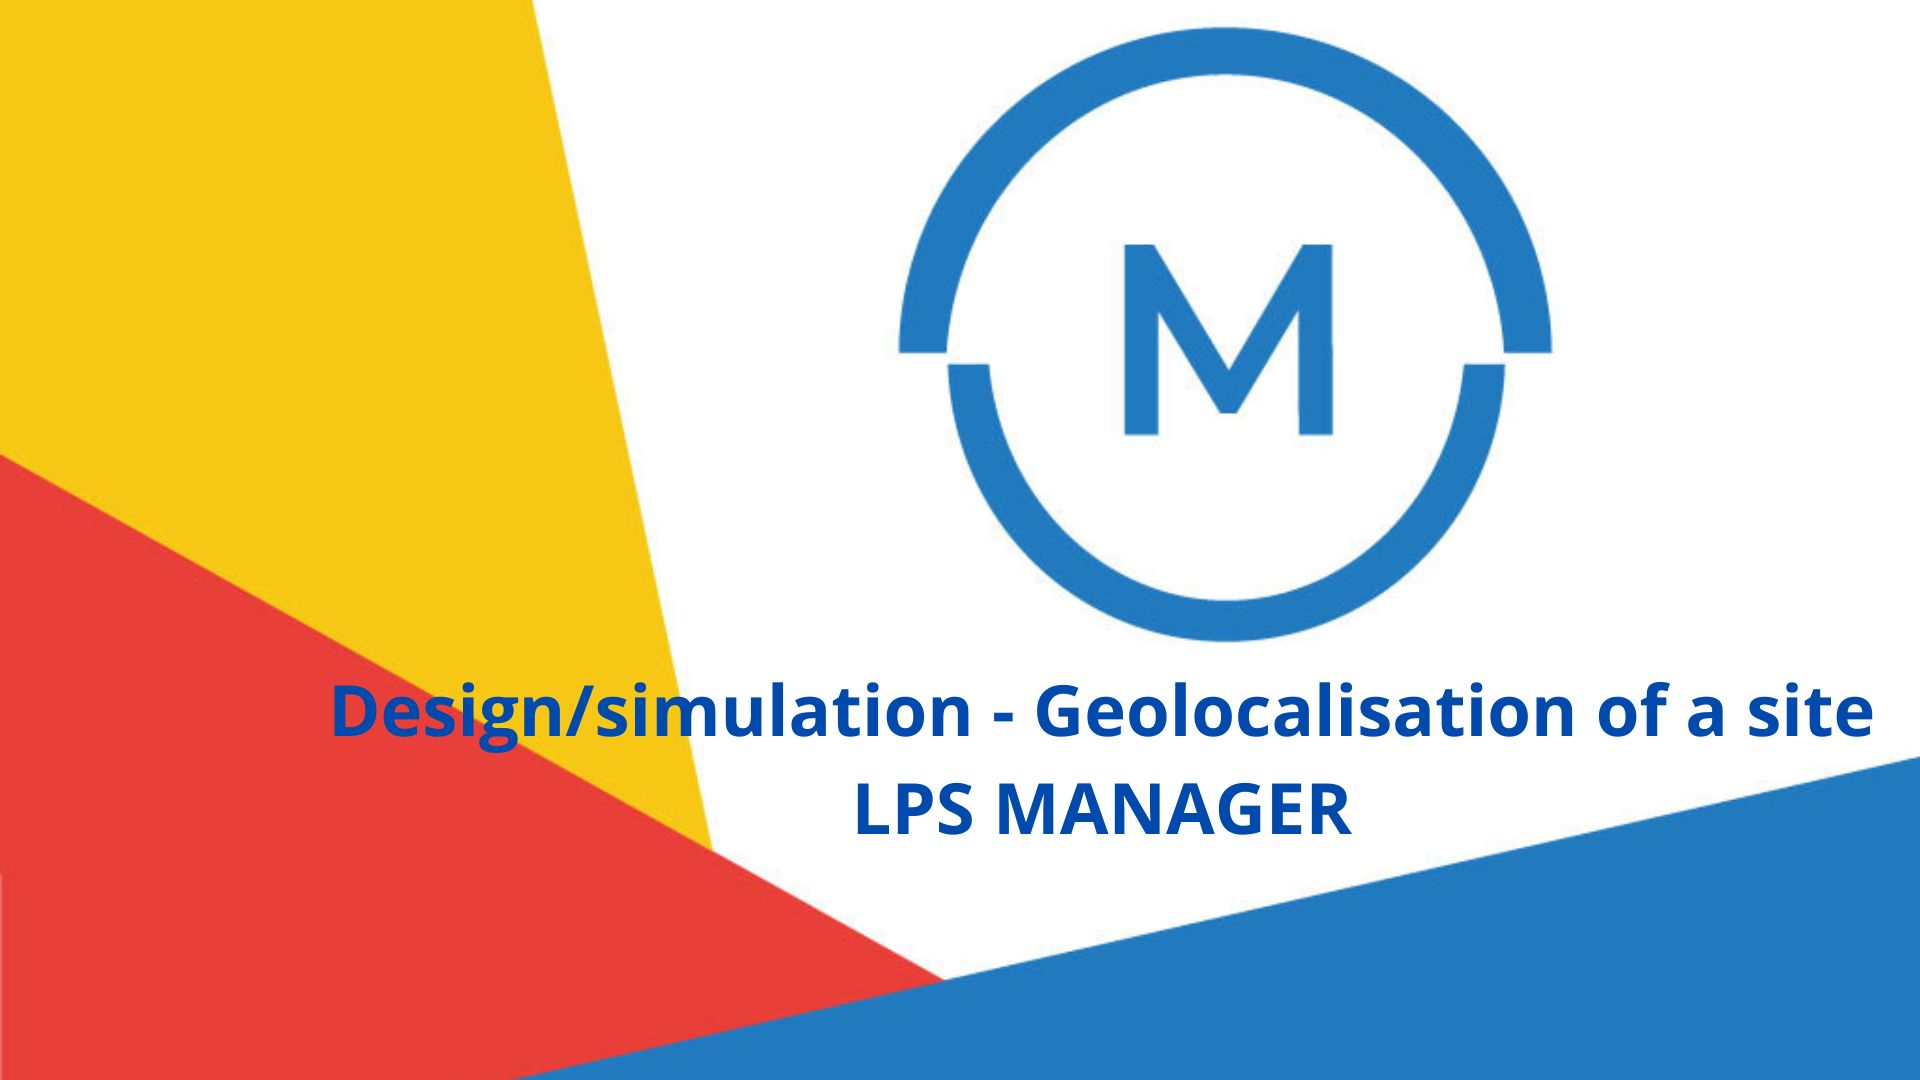 LPS Manager, Design of a lightning protection system, geolocalisation of a site